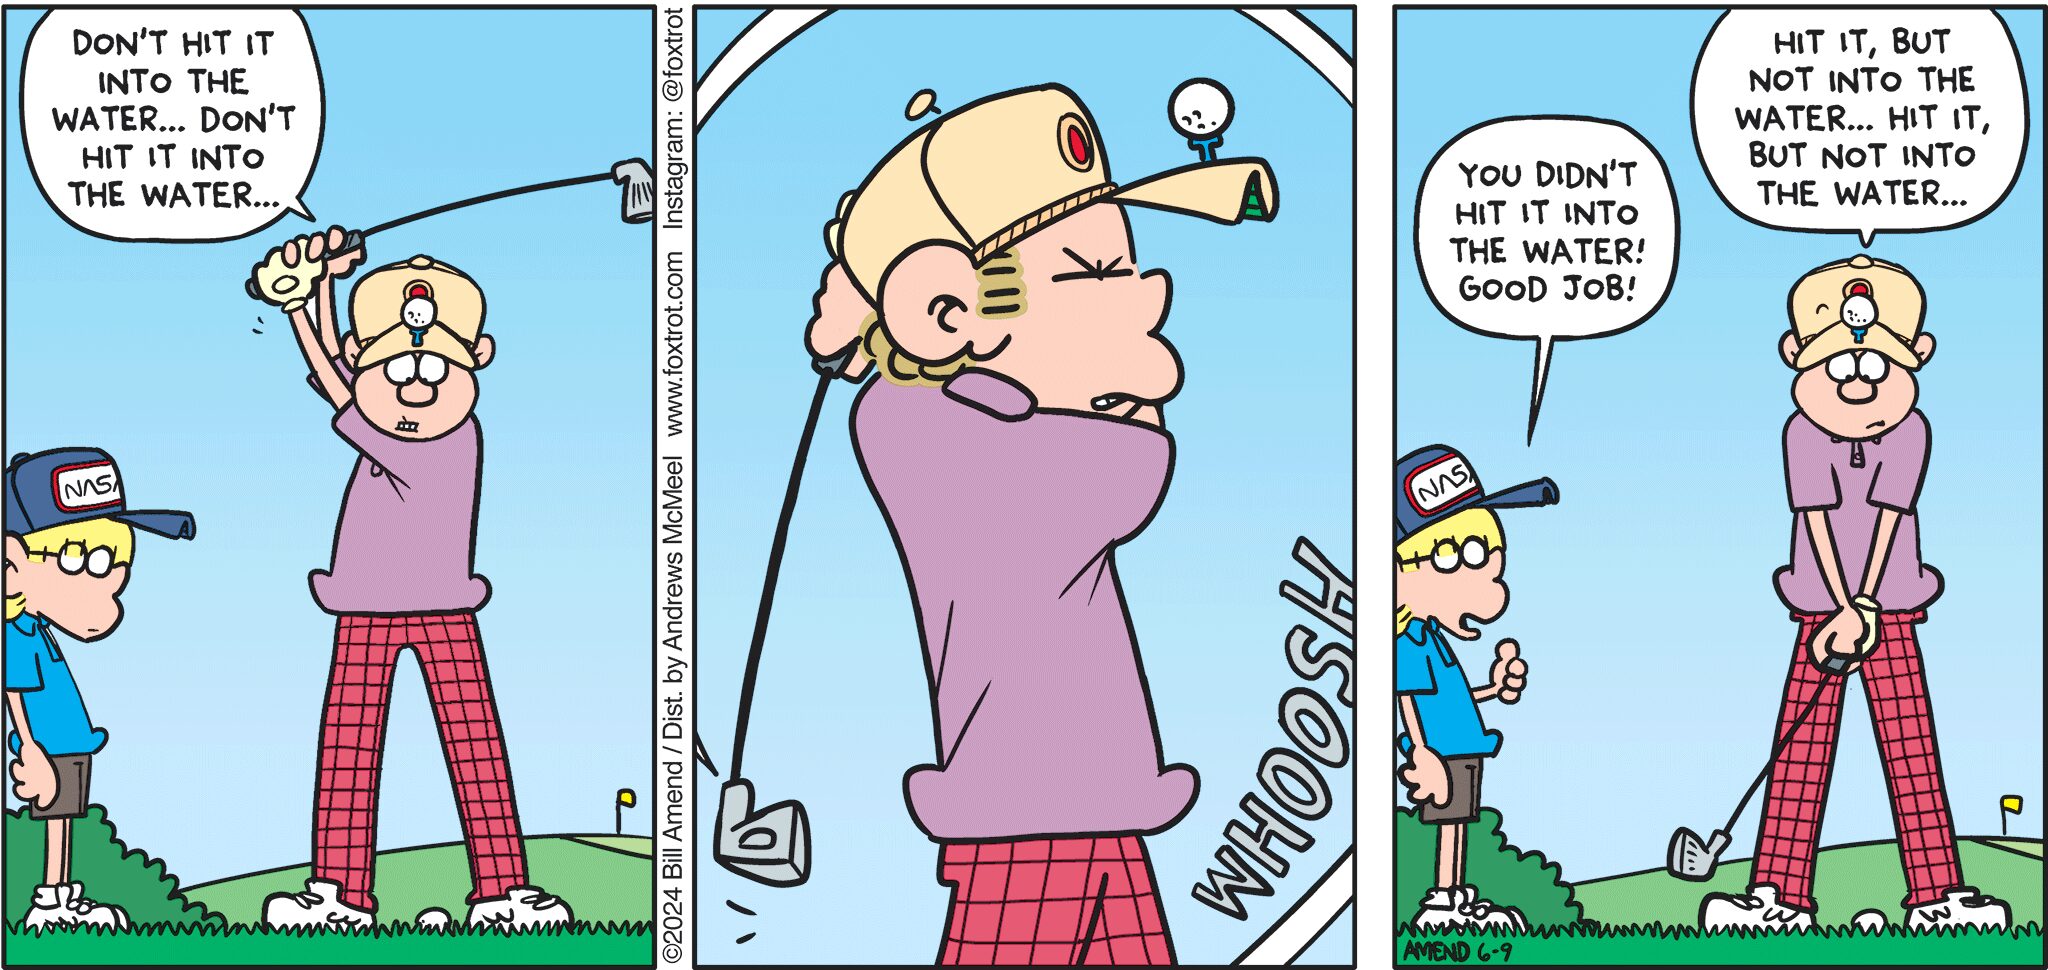 FoxTrot comic strip by Bill Amend - "Swing Thoughts" published June 9, 2024 - Transcript: Roger Fox: Don't hit it into the water... Don't hit it into the water... Jason Fox: You didn't hit it into the water! Good job! Roger Fox: Hit it, but not into the water... hit it, but not into the water...